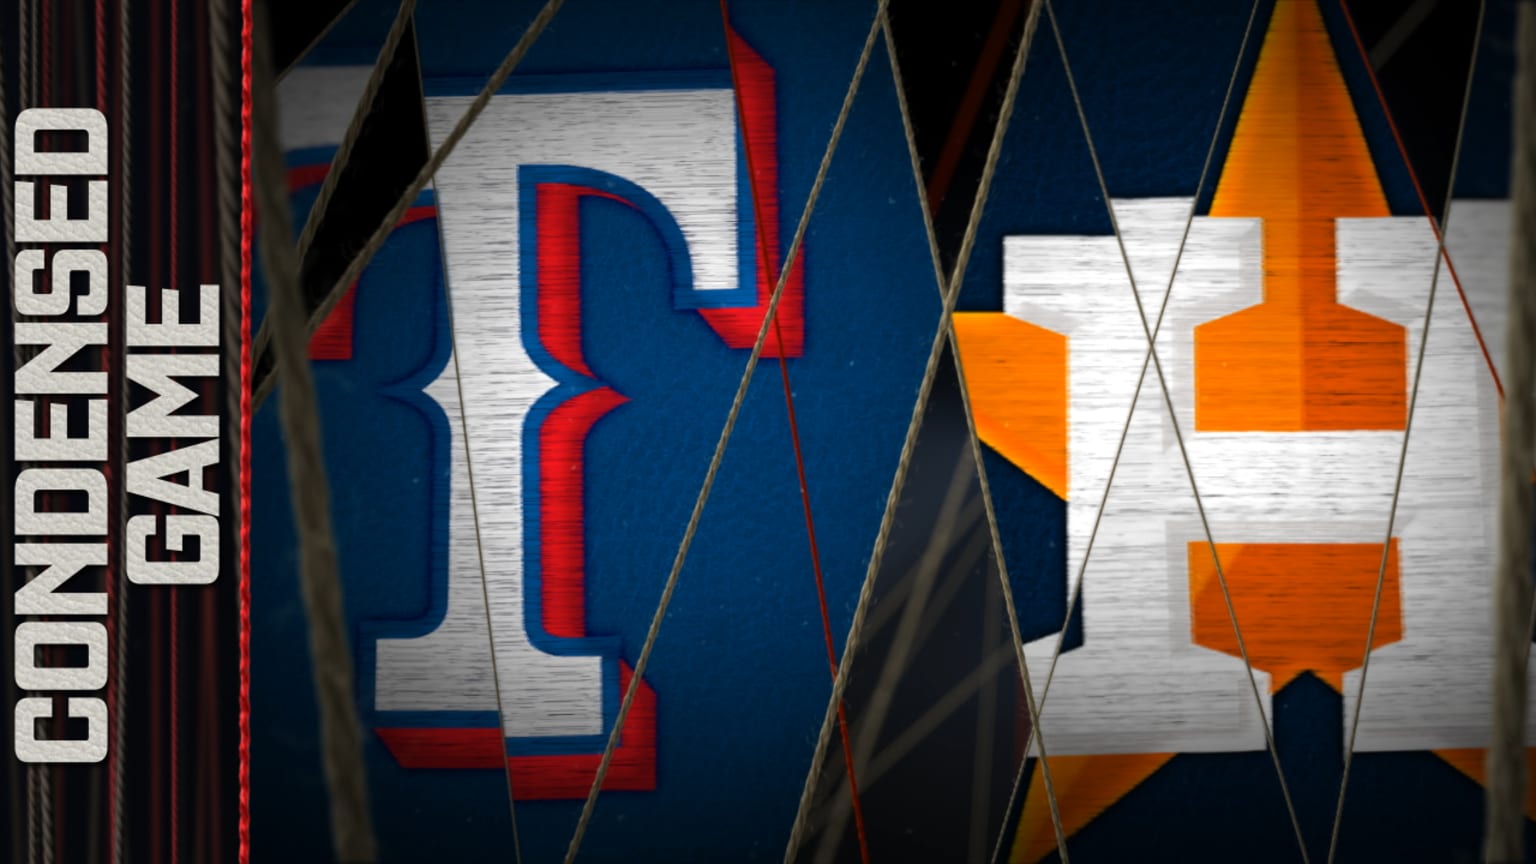 Rangers vs Astros summary online: stats, scores and highlights